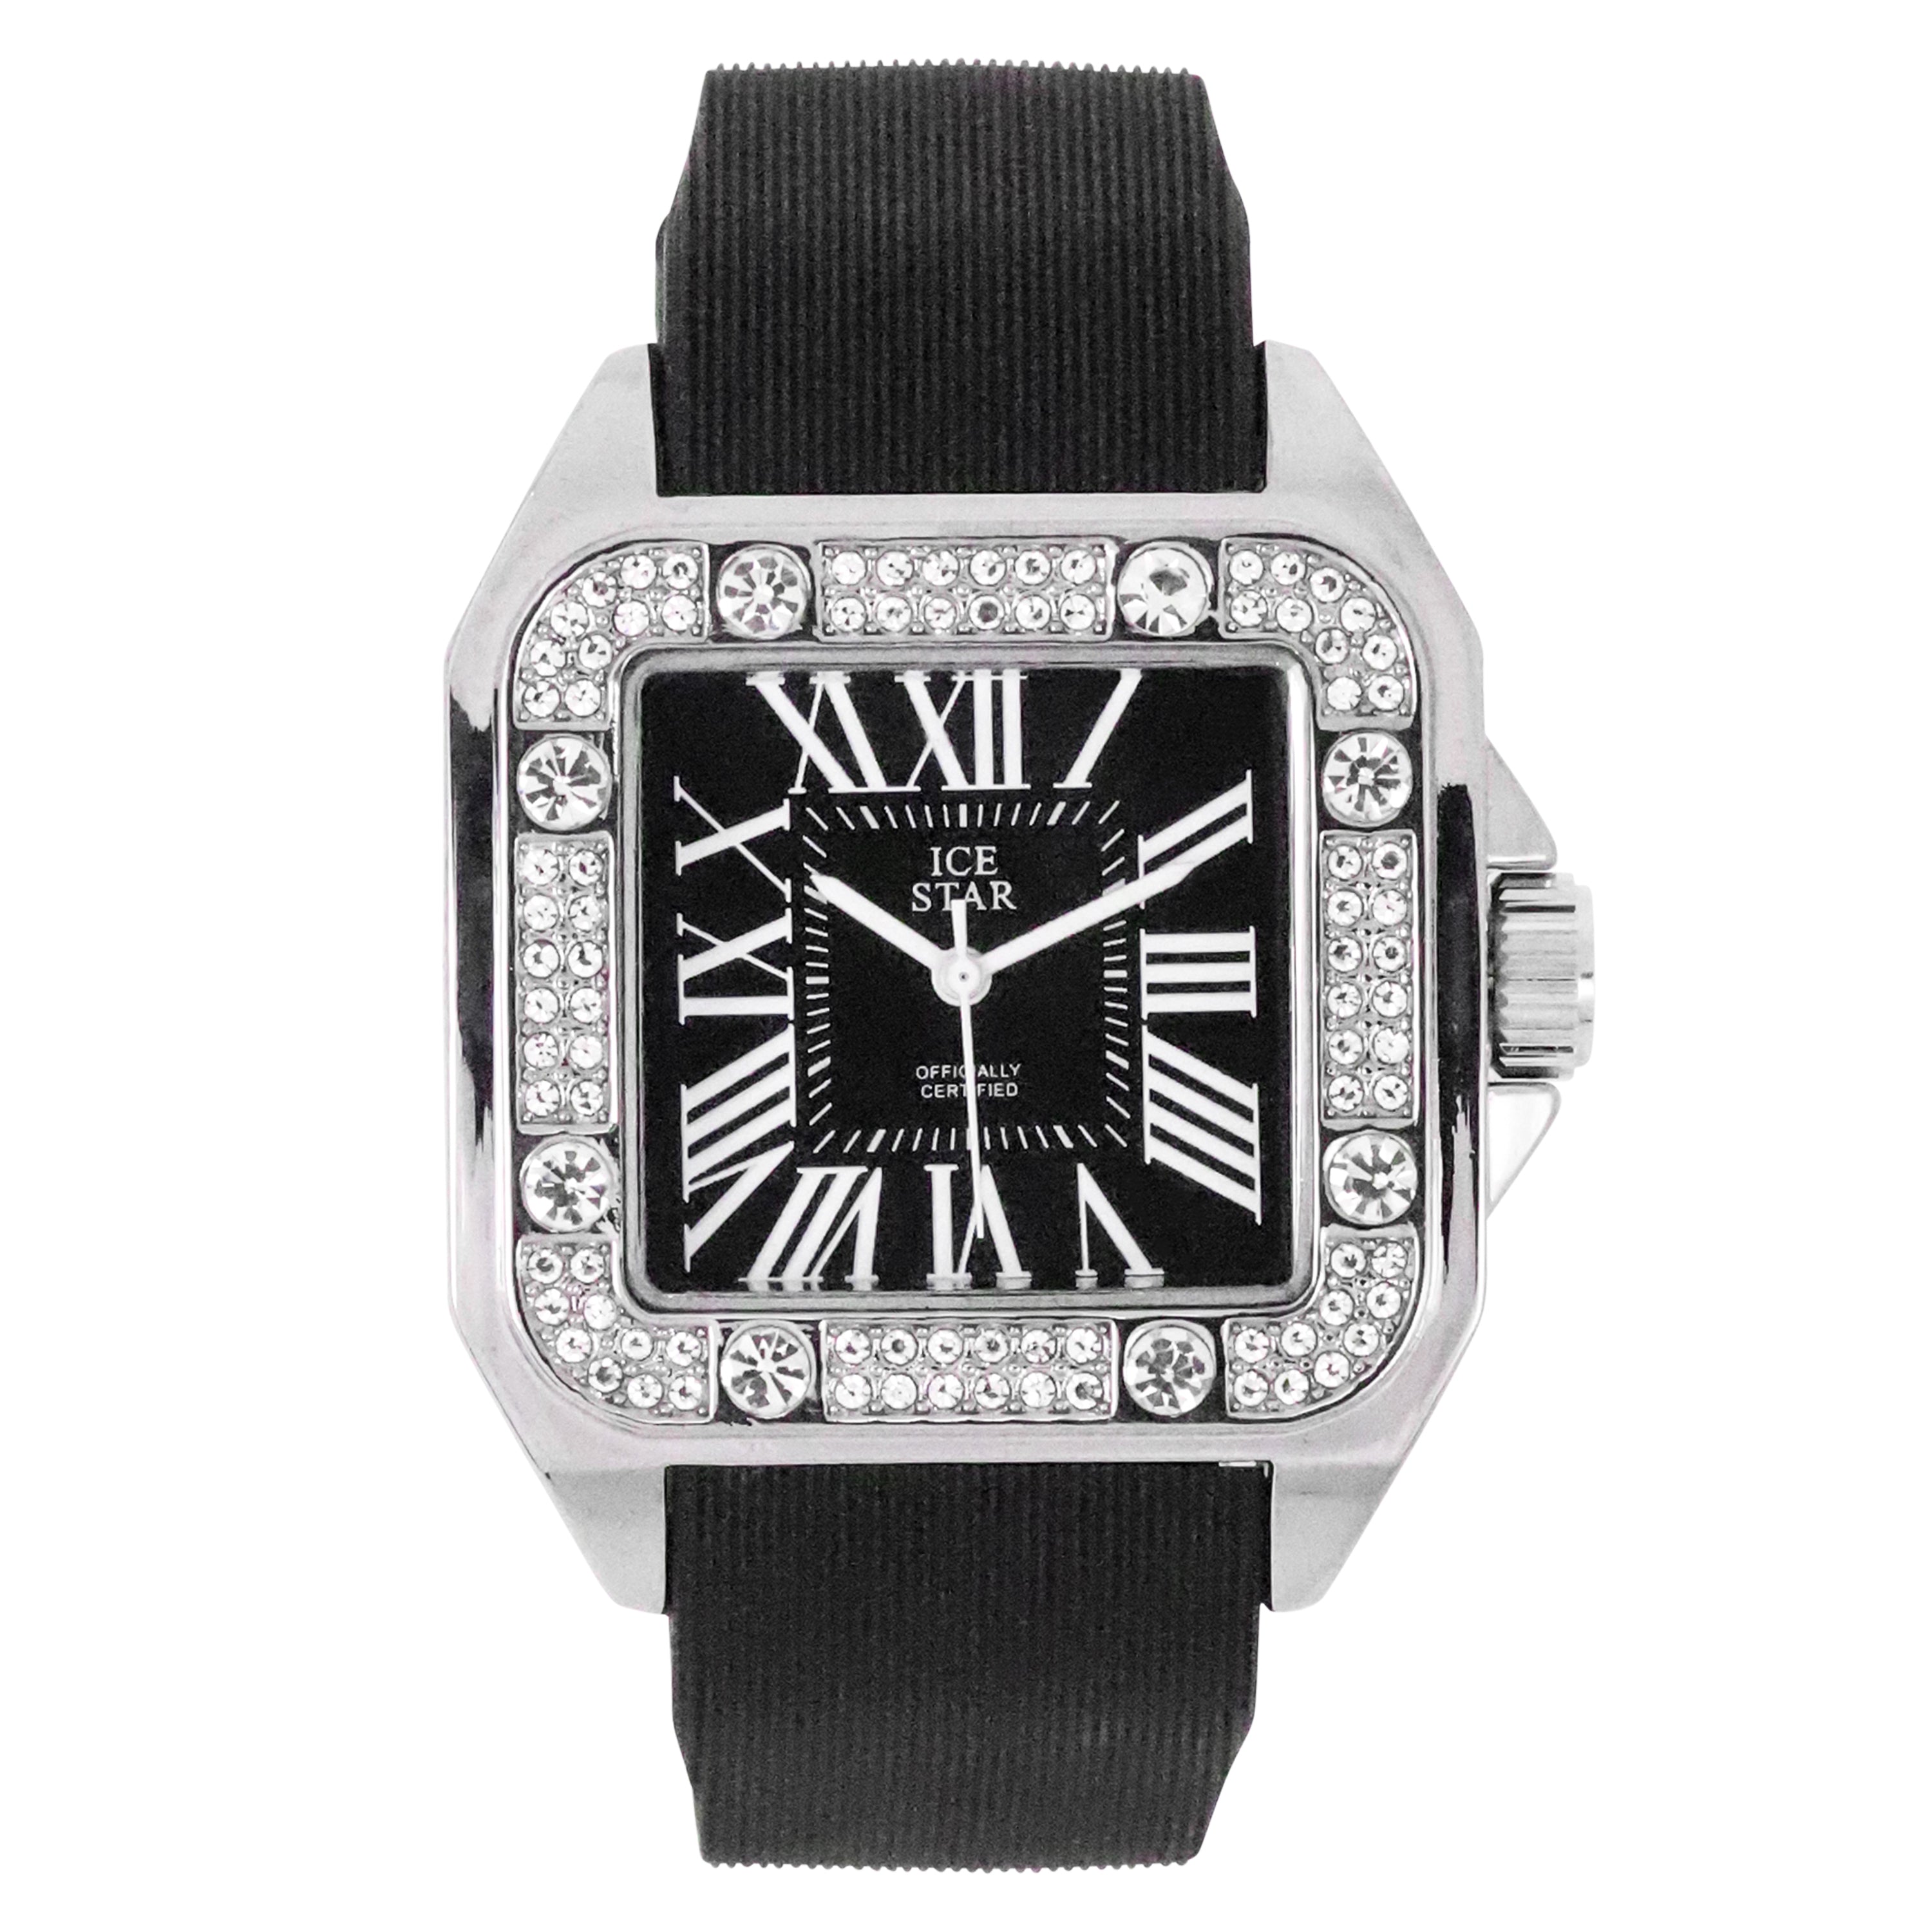 Men's Silicone Band Watch 40mm Silver - Square Dial